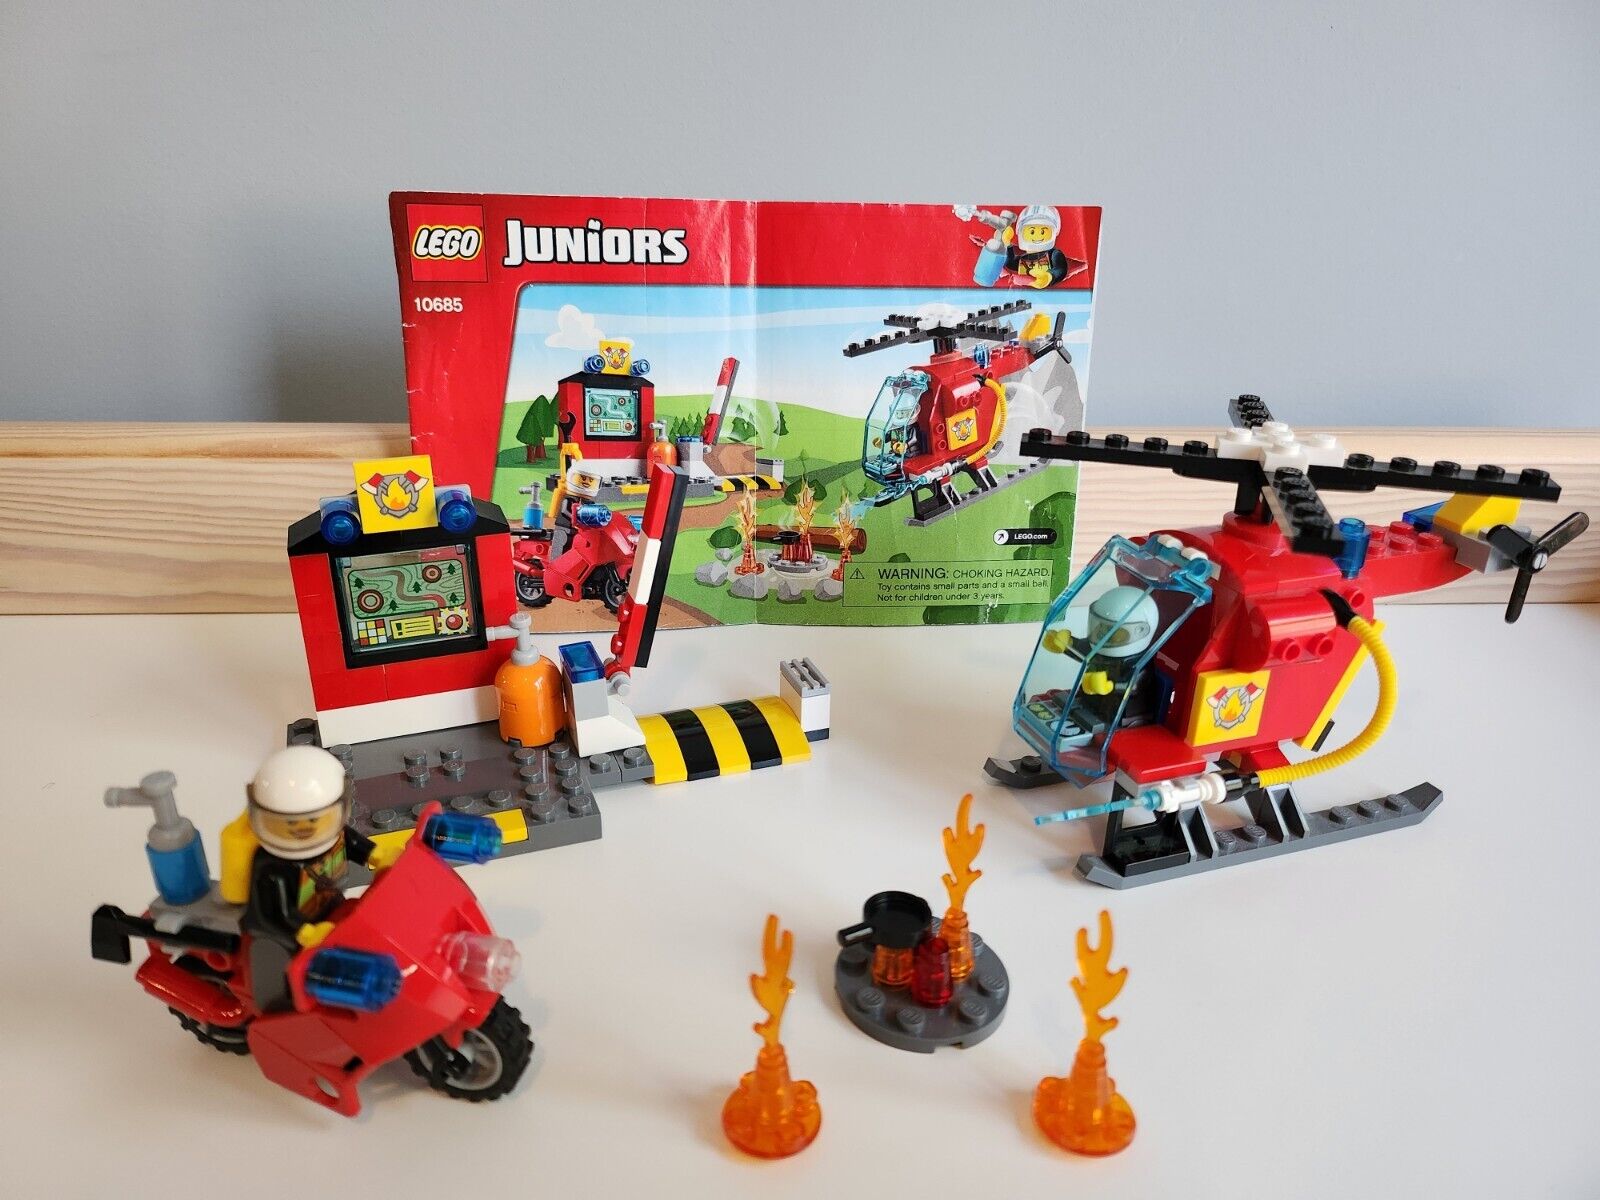 Retired) Lego Juniors: Fire Fighters Suitcase (10685) 100% Complete w/ Manual | eBay